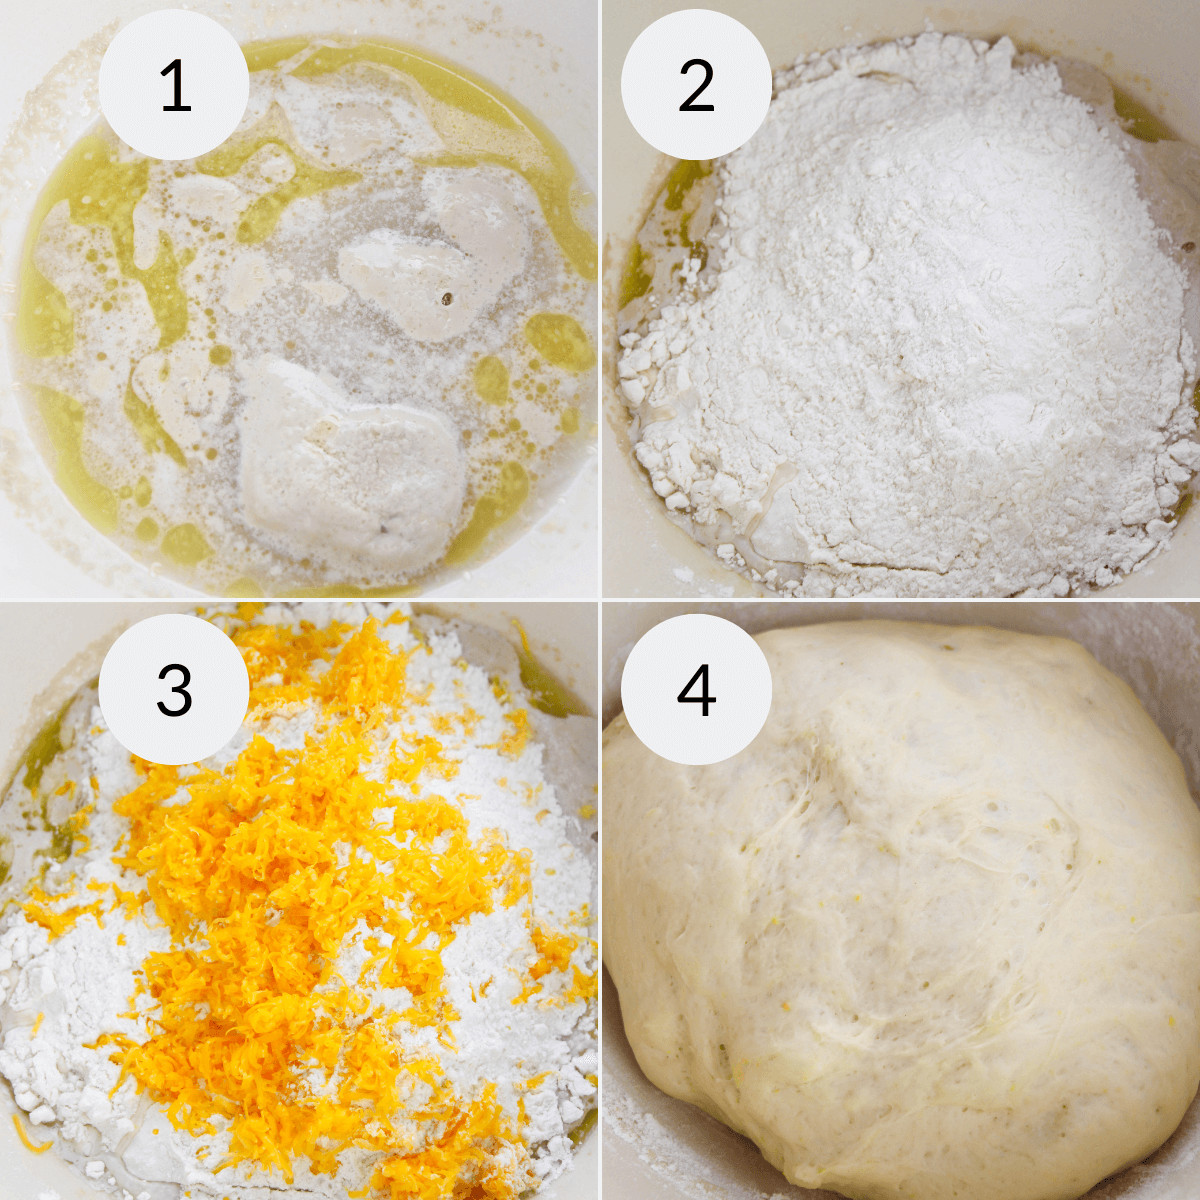 Step by step images of prepaing the dough for soft pretzels with cheese.